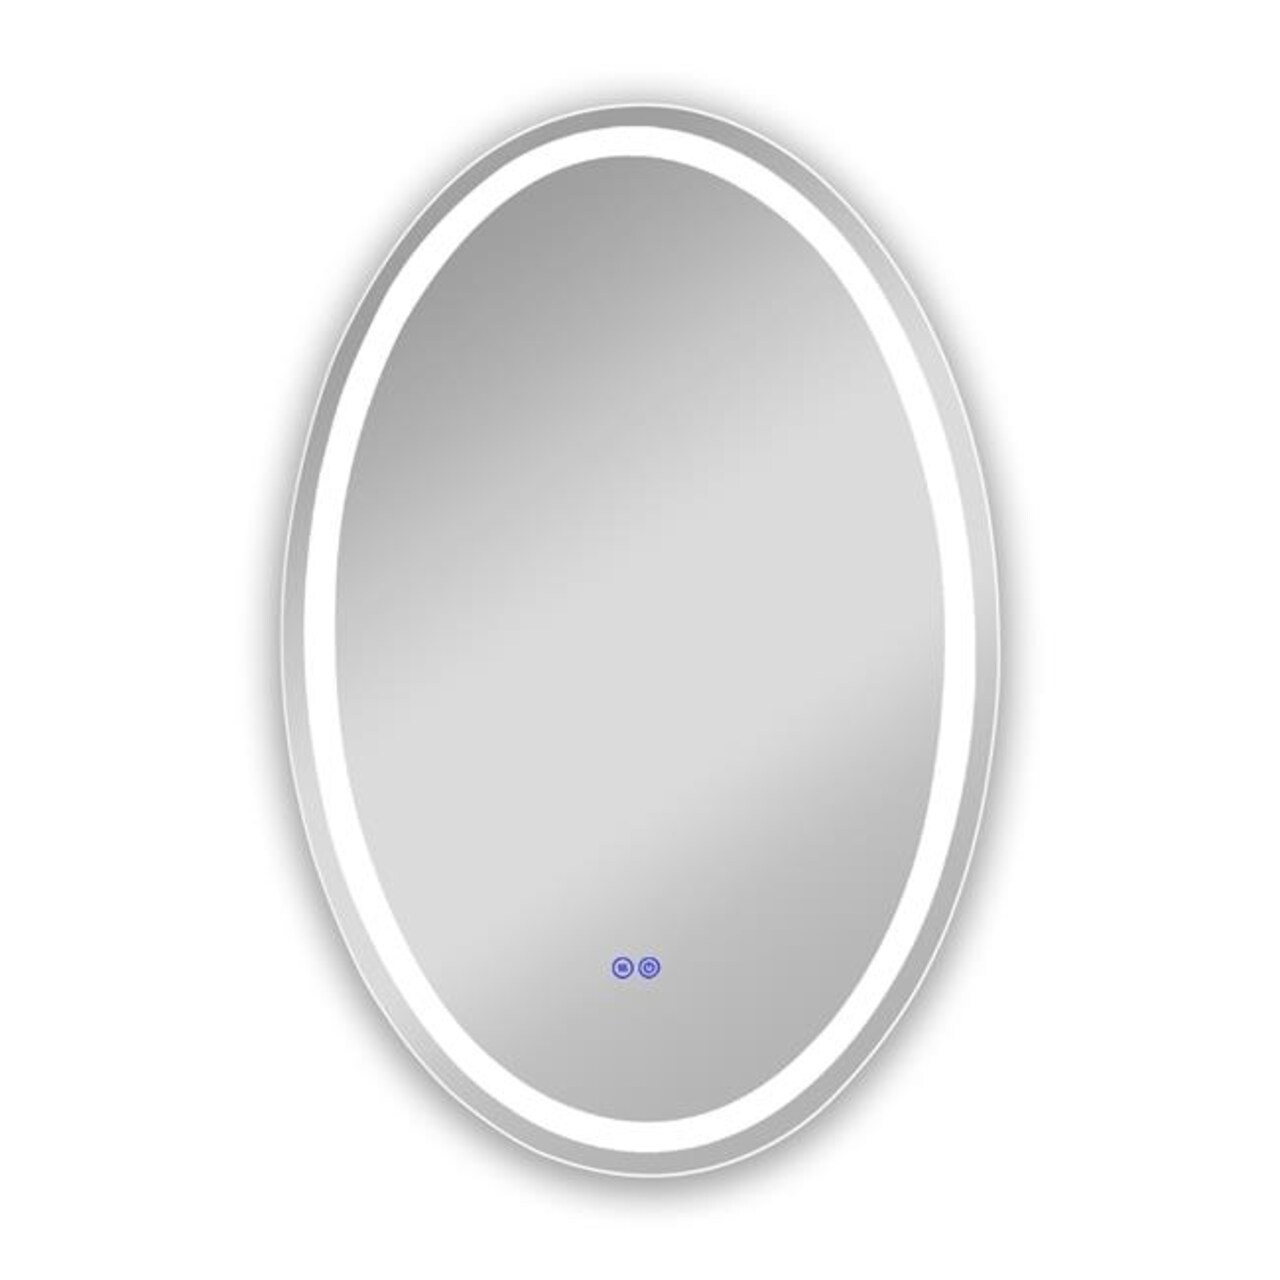 Chloe Lighting CH9M052BL36-VOV 36 in. 3 Color Temperatures 3000K-6000K Luminosity Back Lit Oval Touchscreen LED Mirror